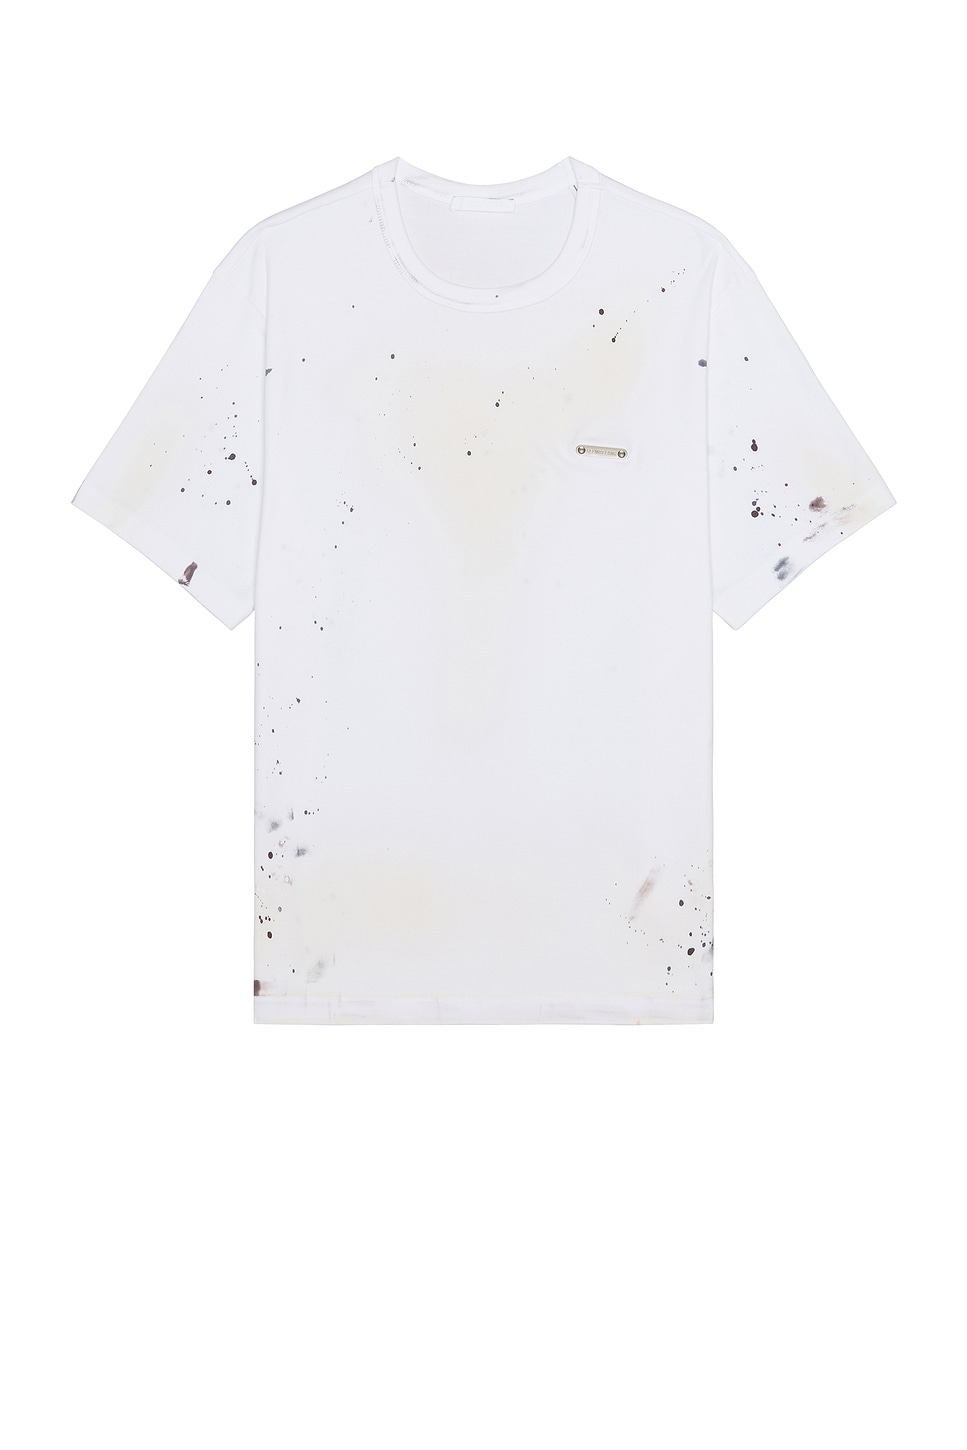 Painted T-shirt in White